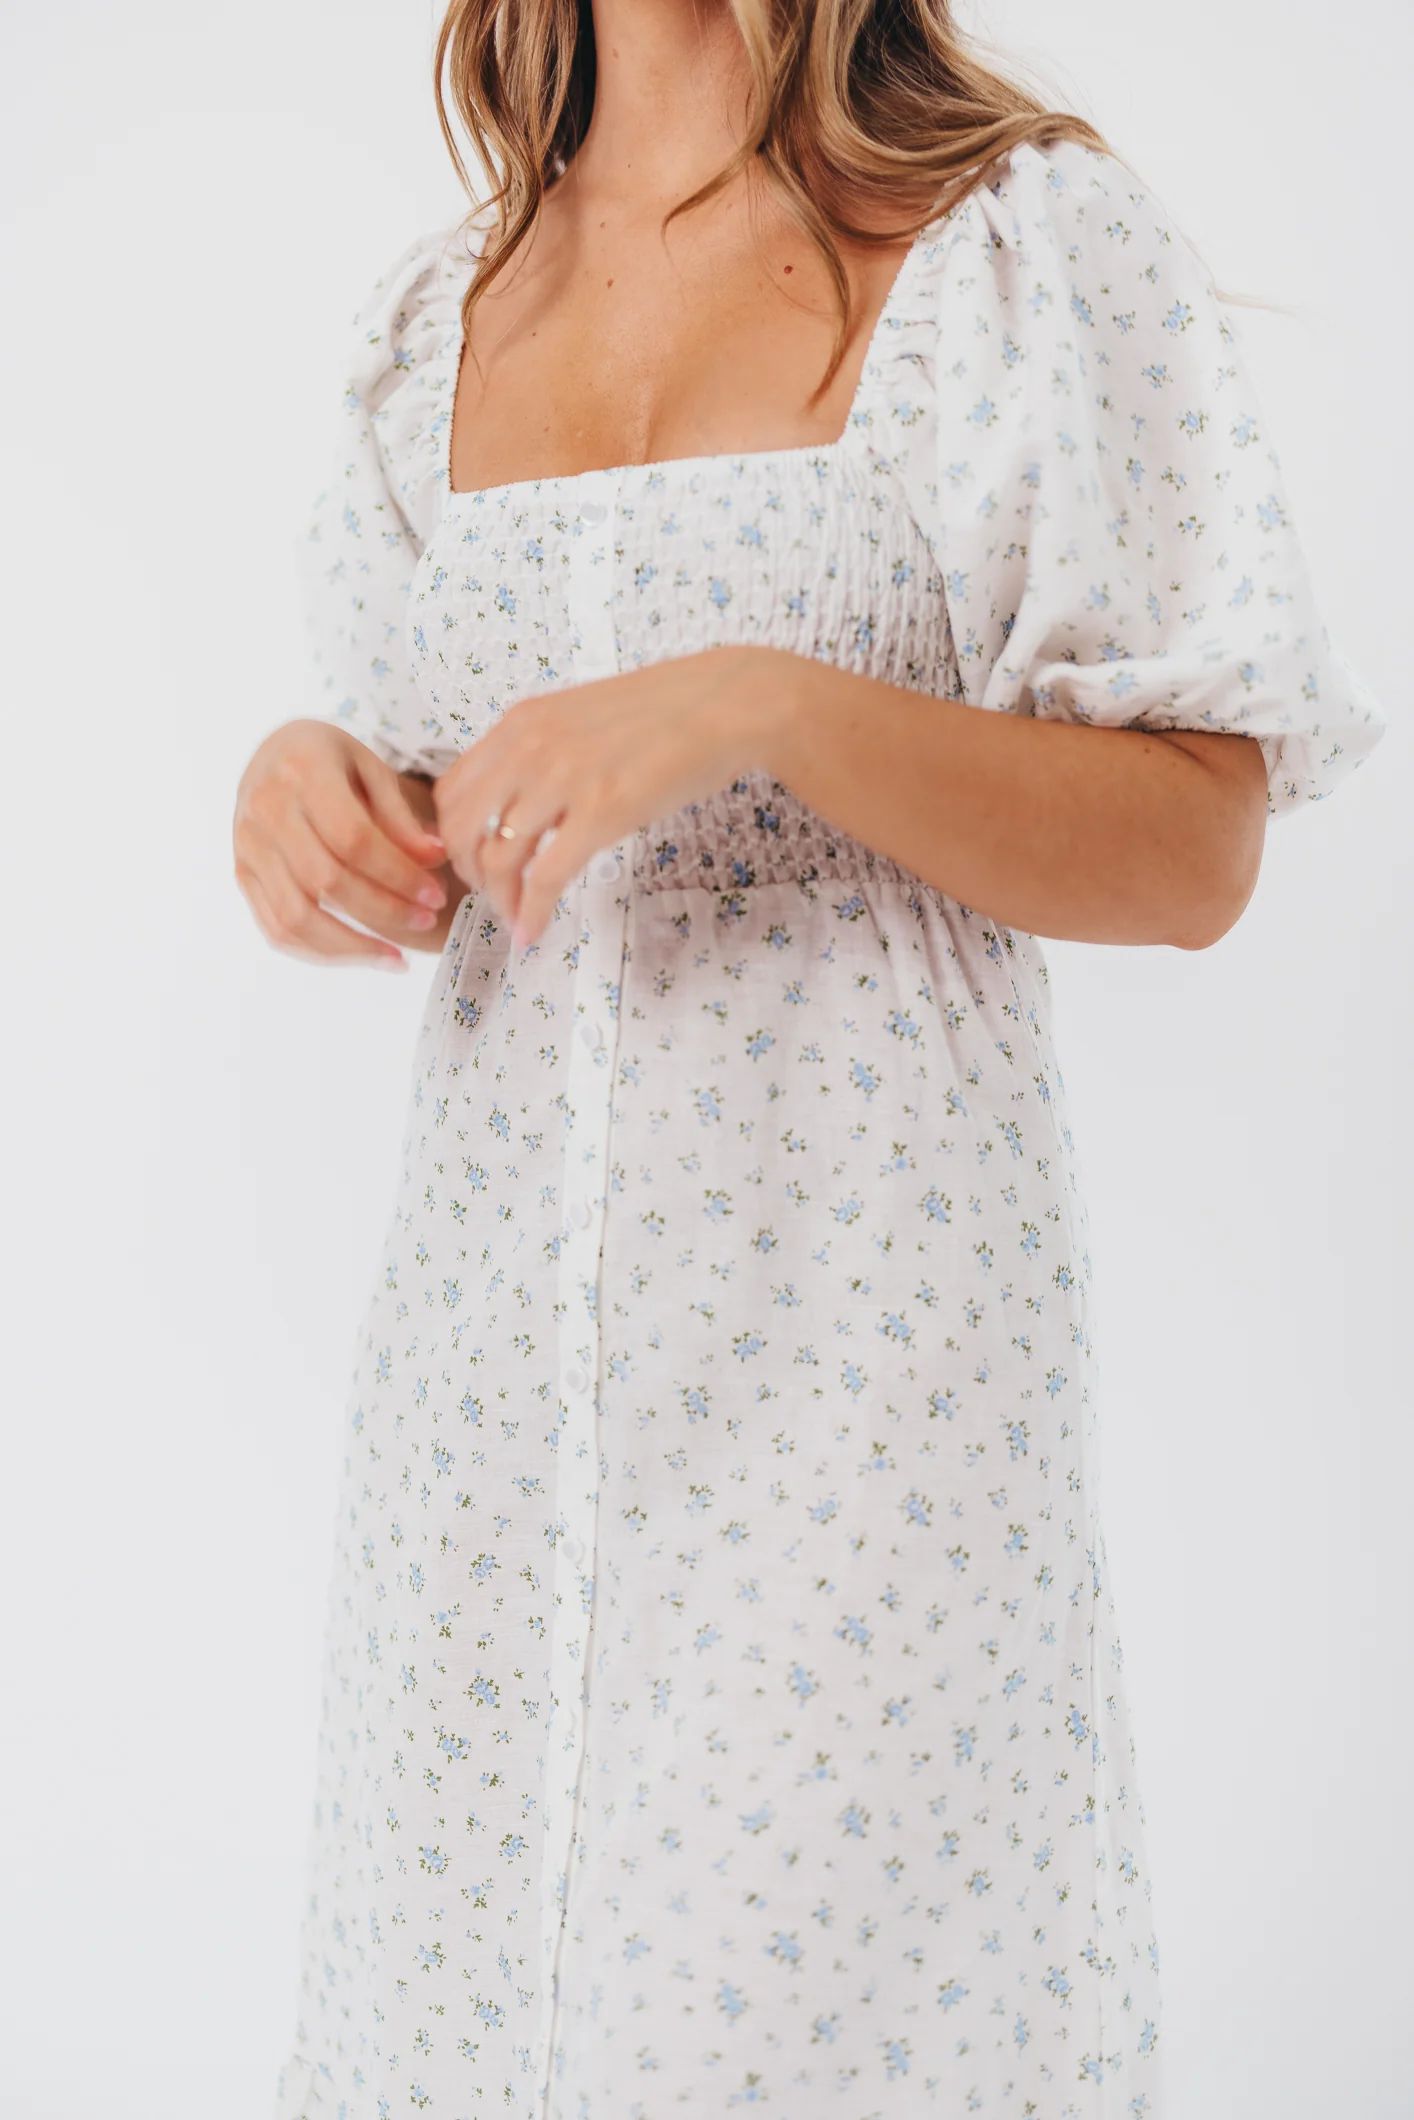 Daisy Maxi Dress in White/Blue Floral | Worth Collective